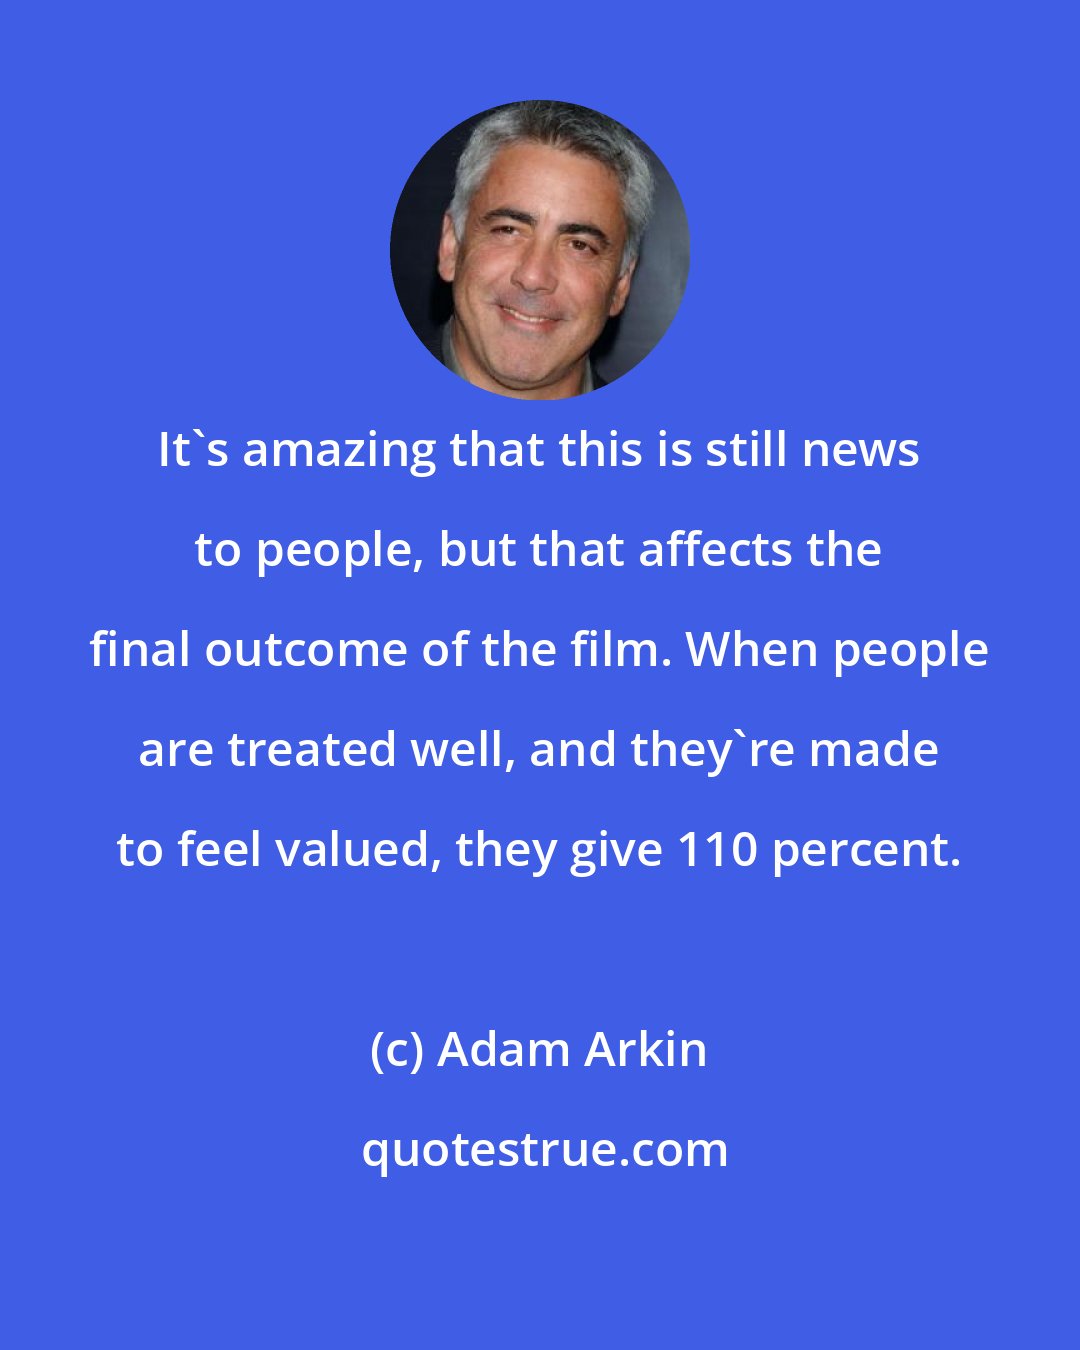 Adam Arkin: It's amazing that this is still news to people, but that affects the final outcome of the film. When people are treated well, and they're made to feel valued, they give 110 percent.